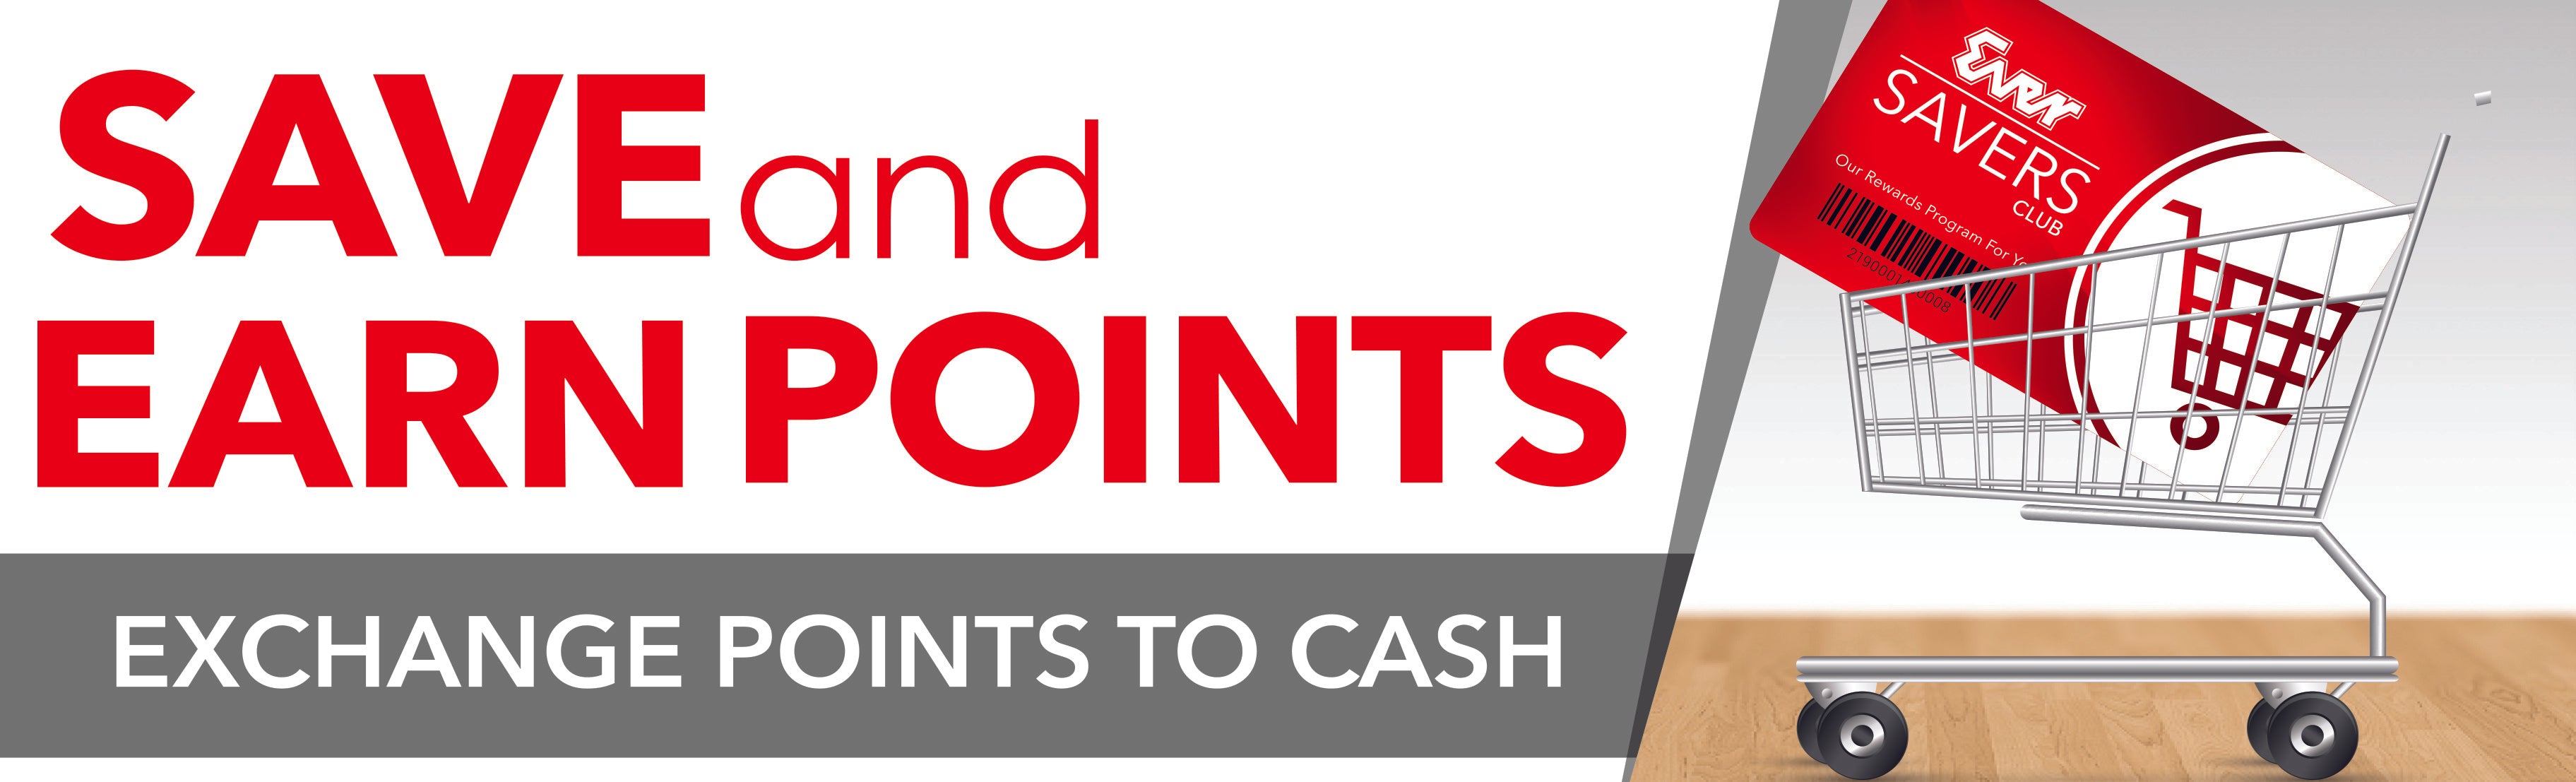 Ever Savers Club Loyalty Points Look Up